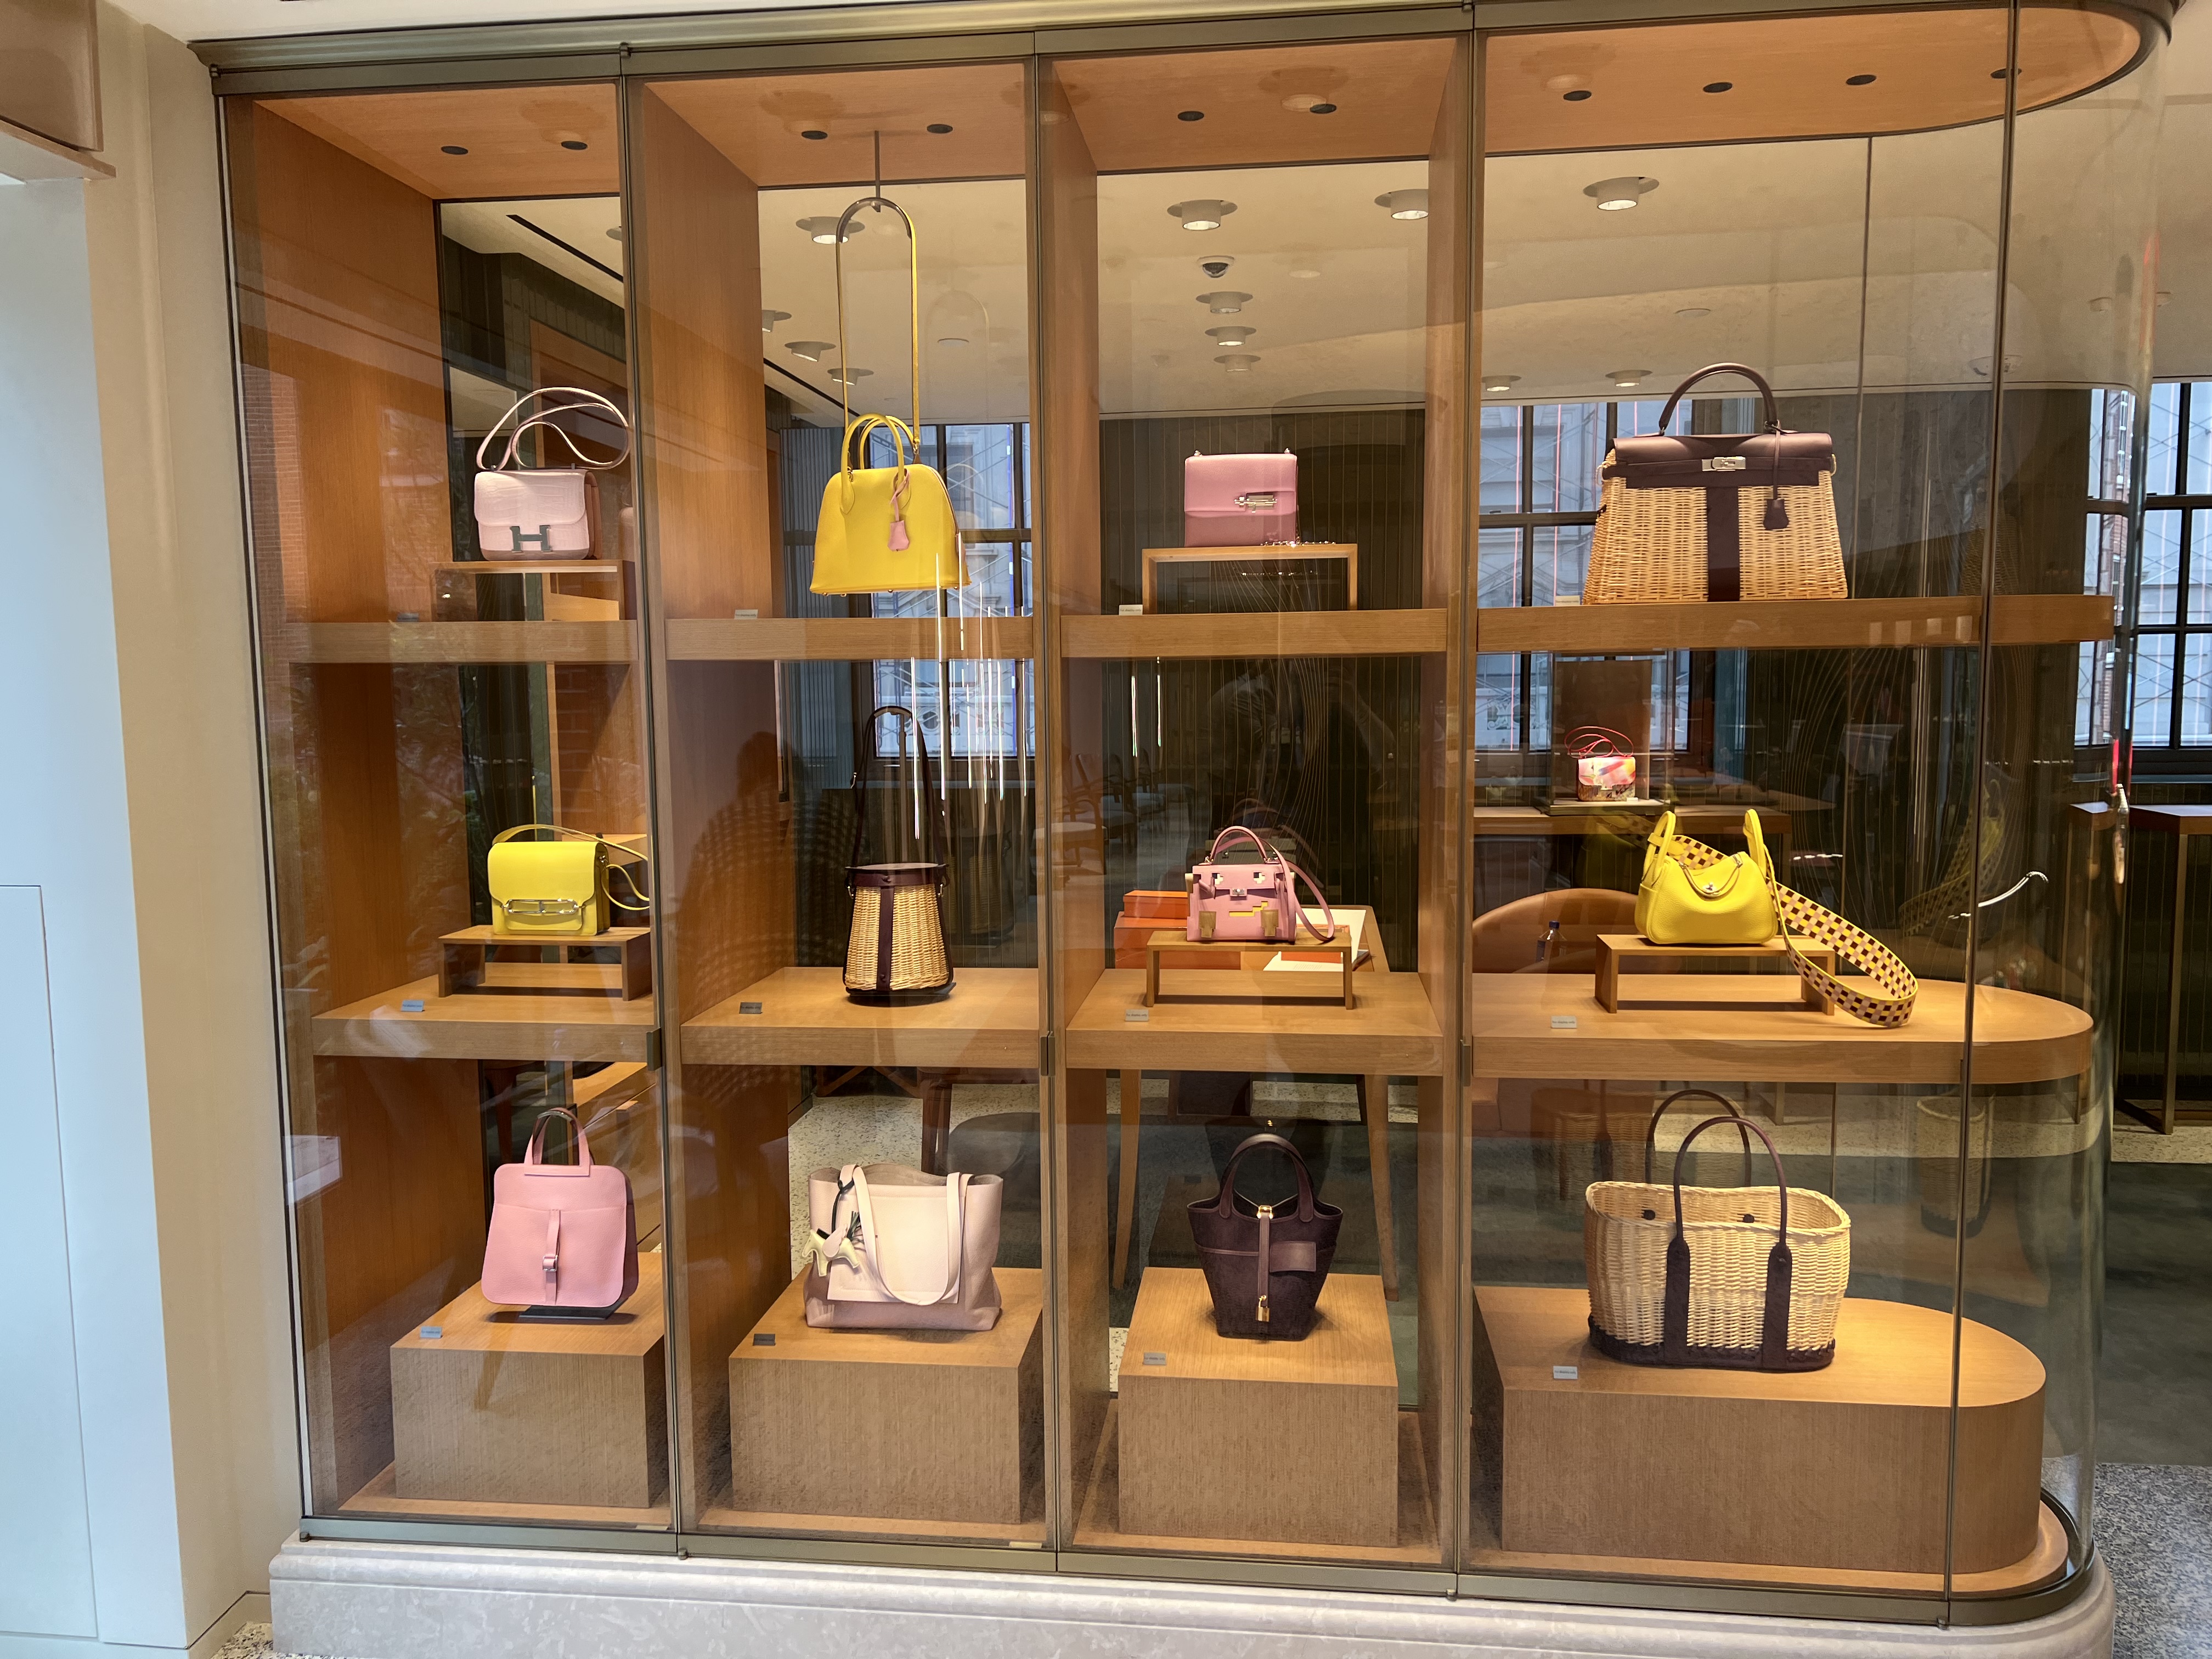 Fourth Floor Bag Display. Photo via @The_Notorious_Pink.